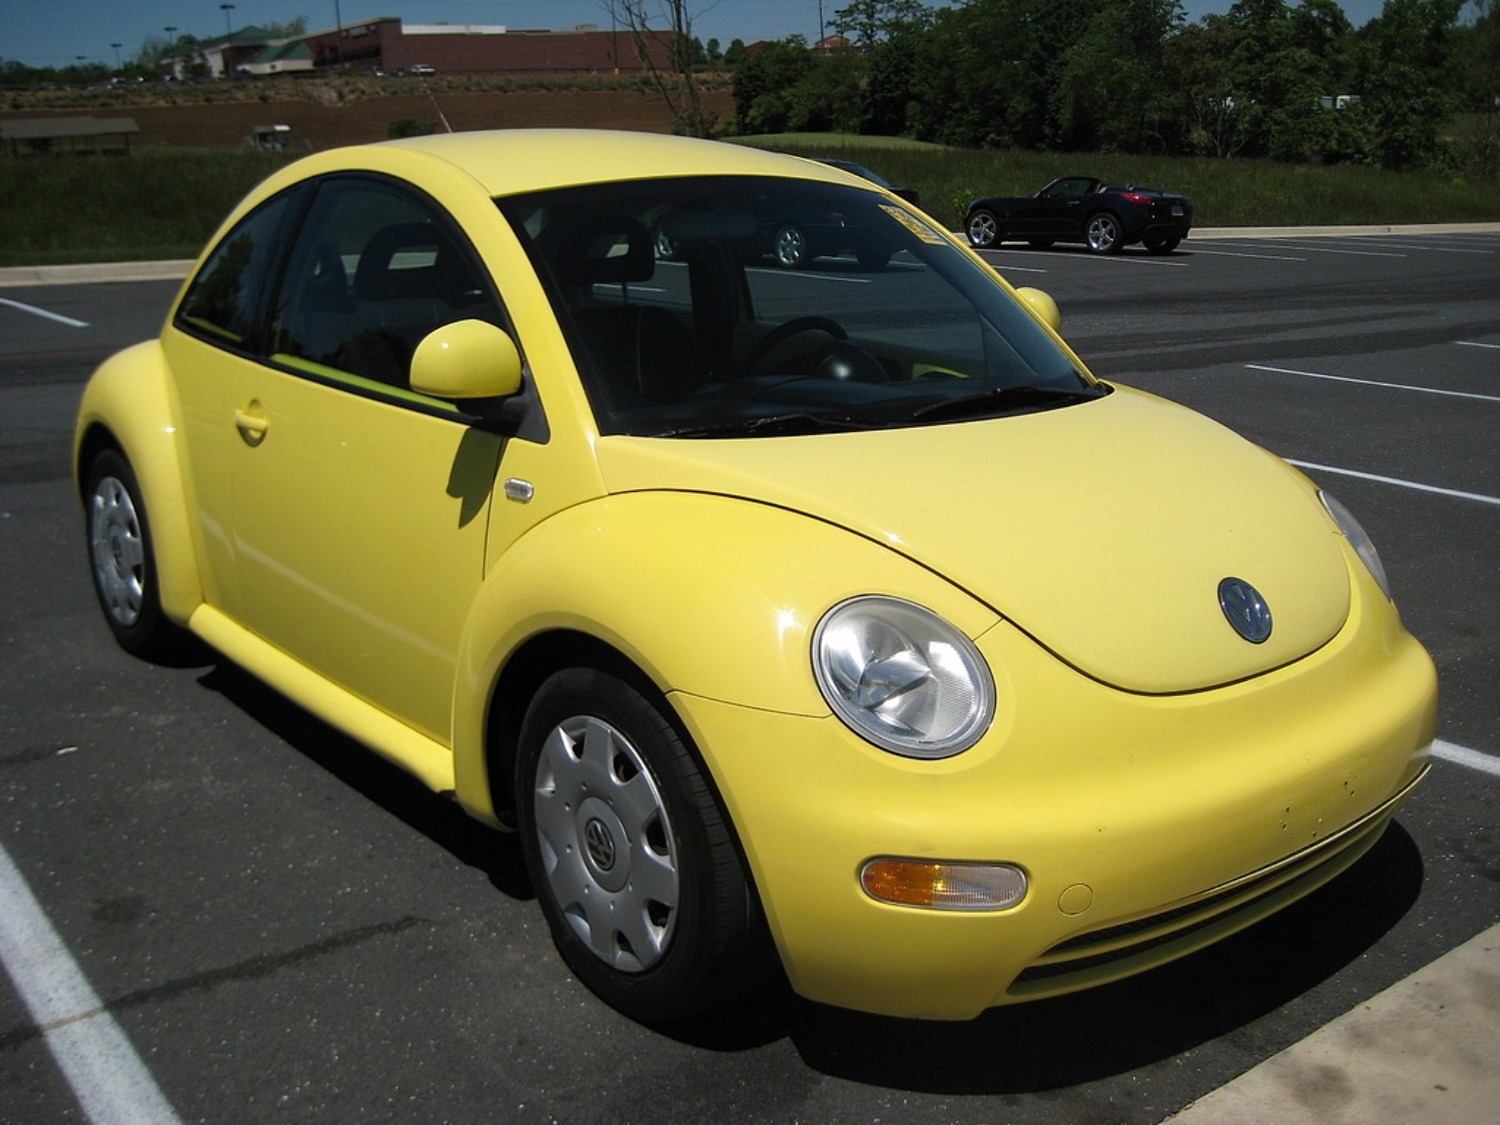 1999 Vw Beetle Yellow 3 Beetle On Rediff Pages